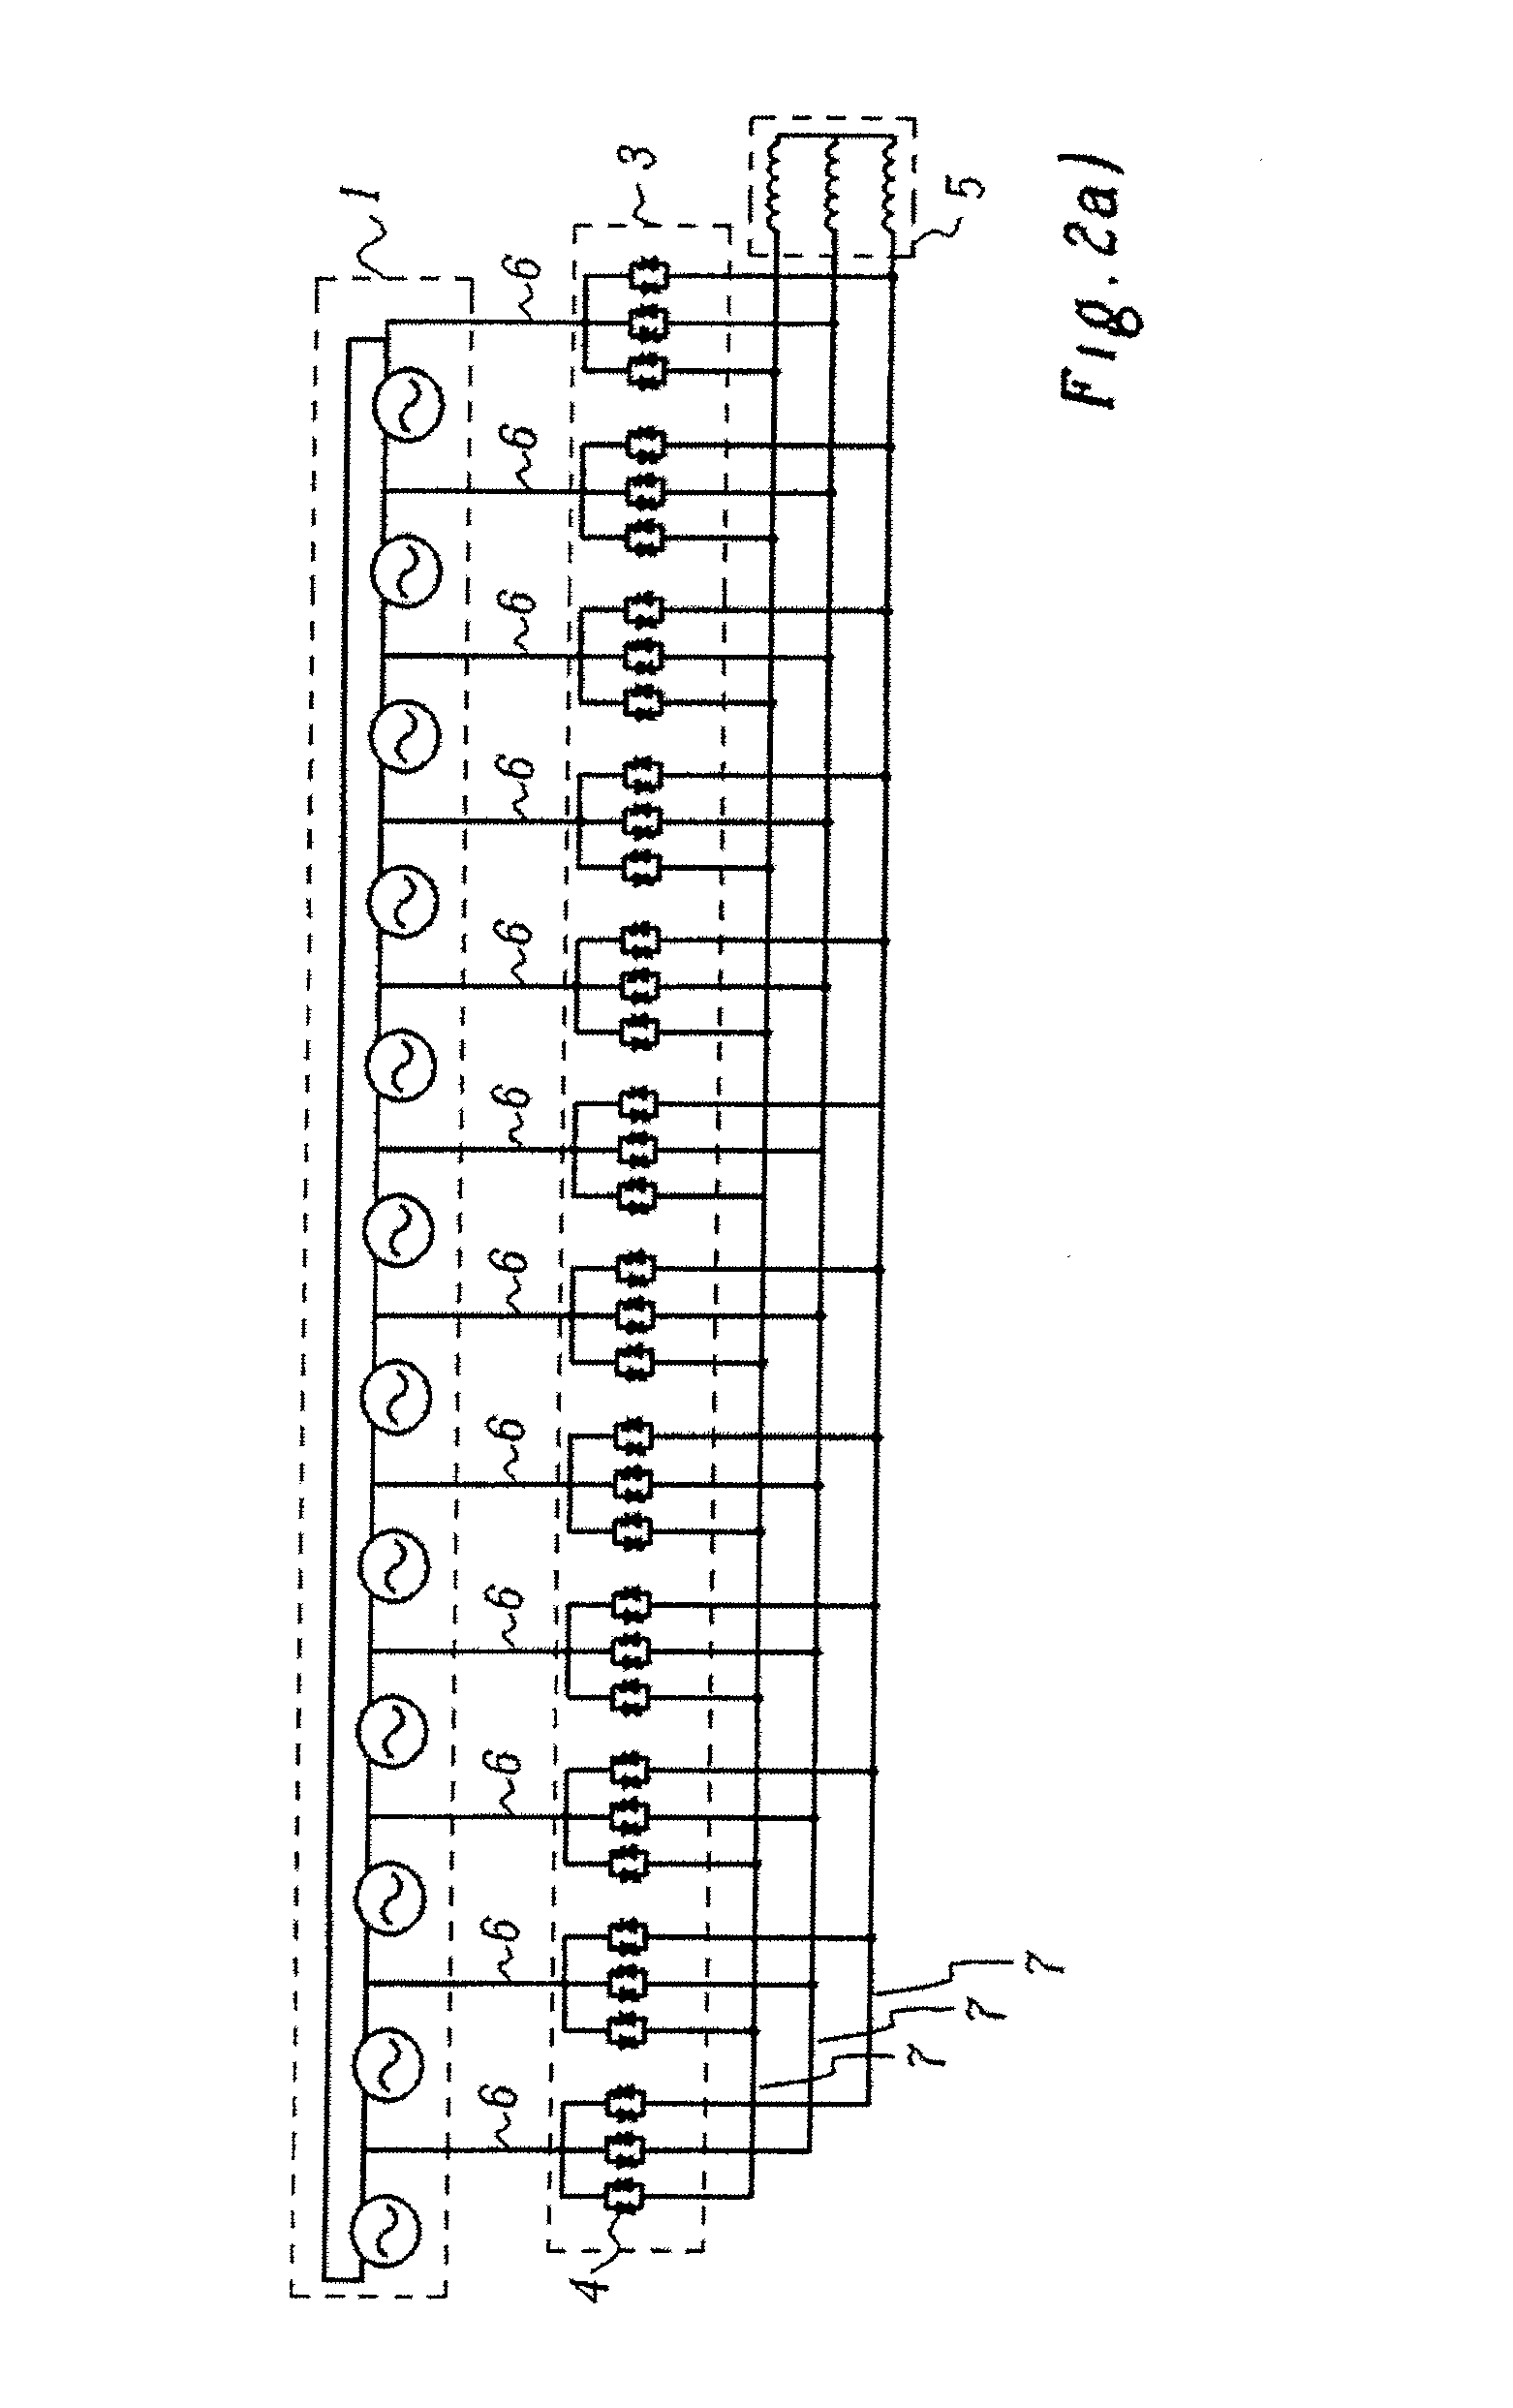 Generator with high phase order